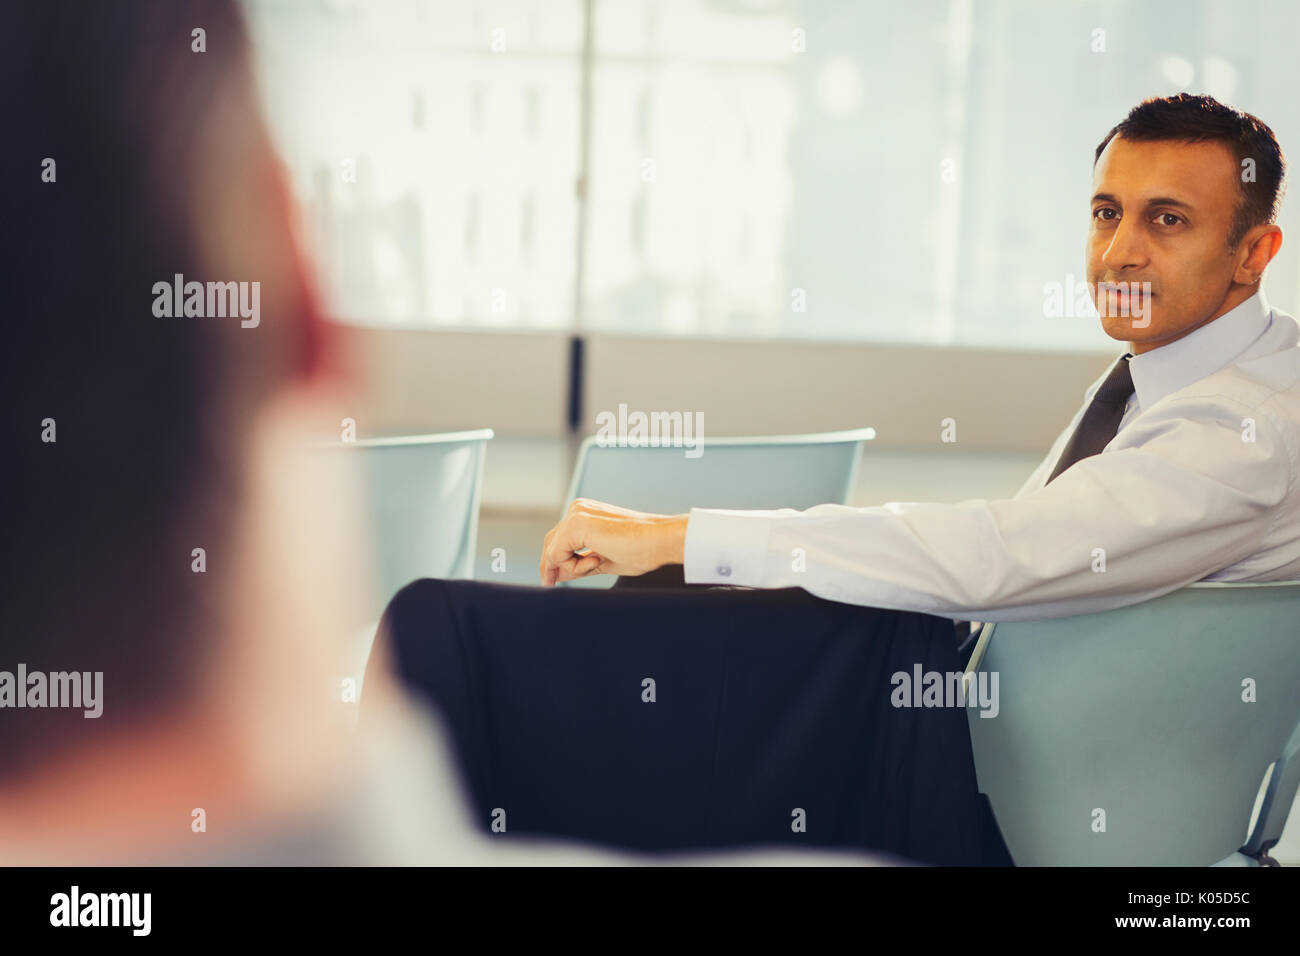 Businessman turning, looking back and listening in conference audience Stock Photo